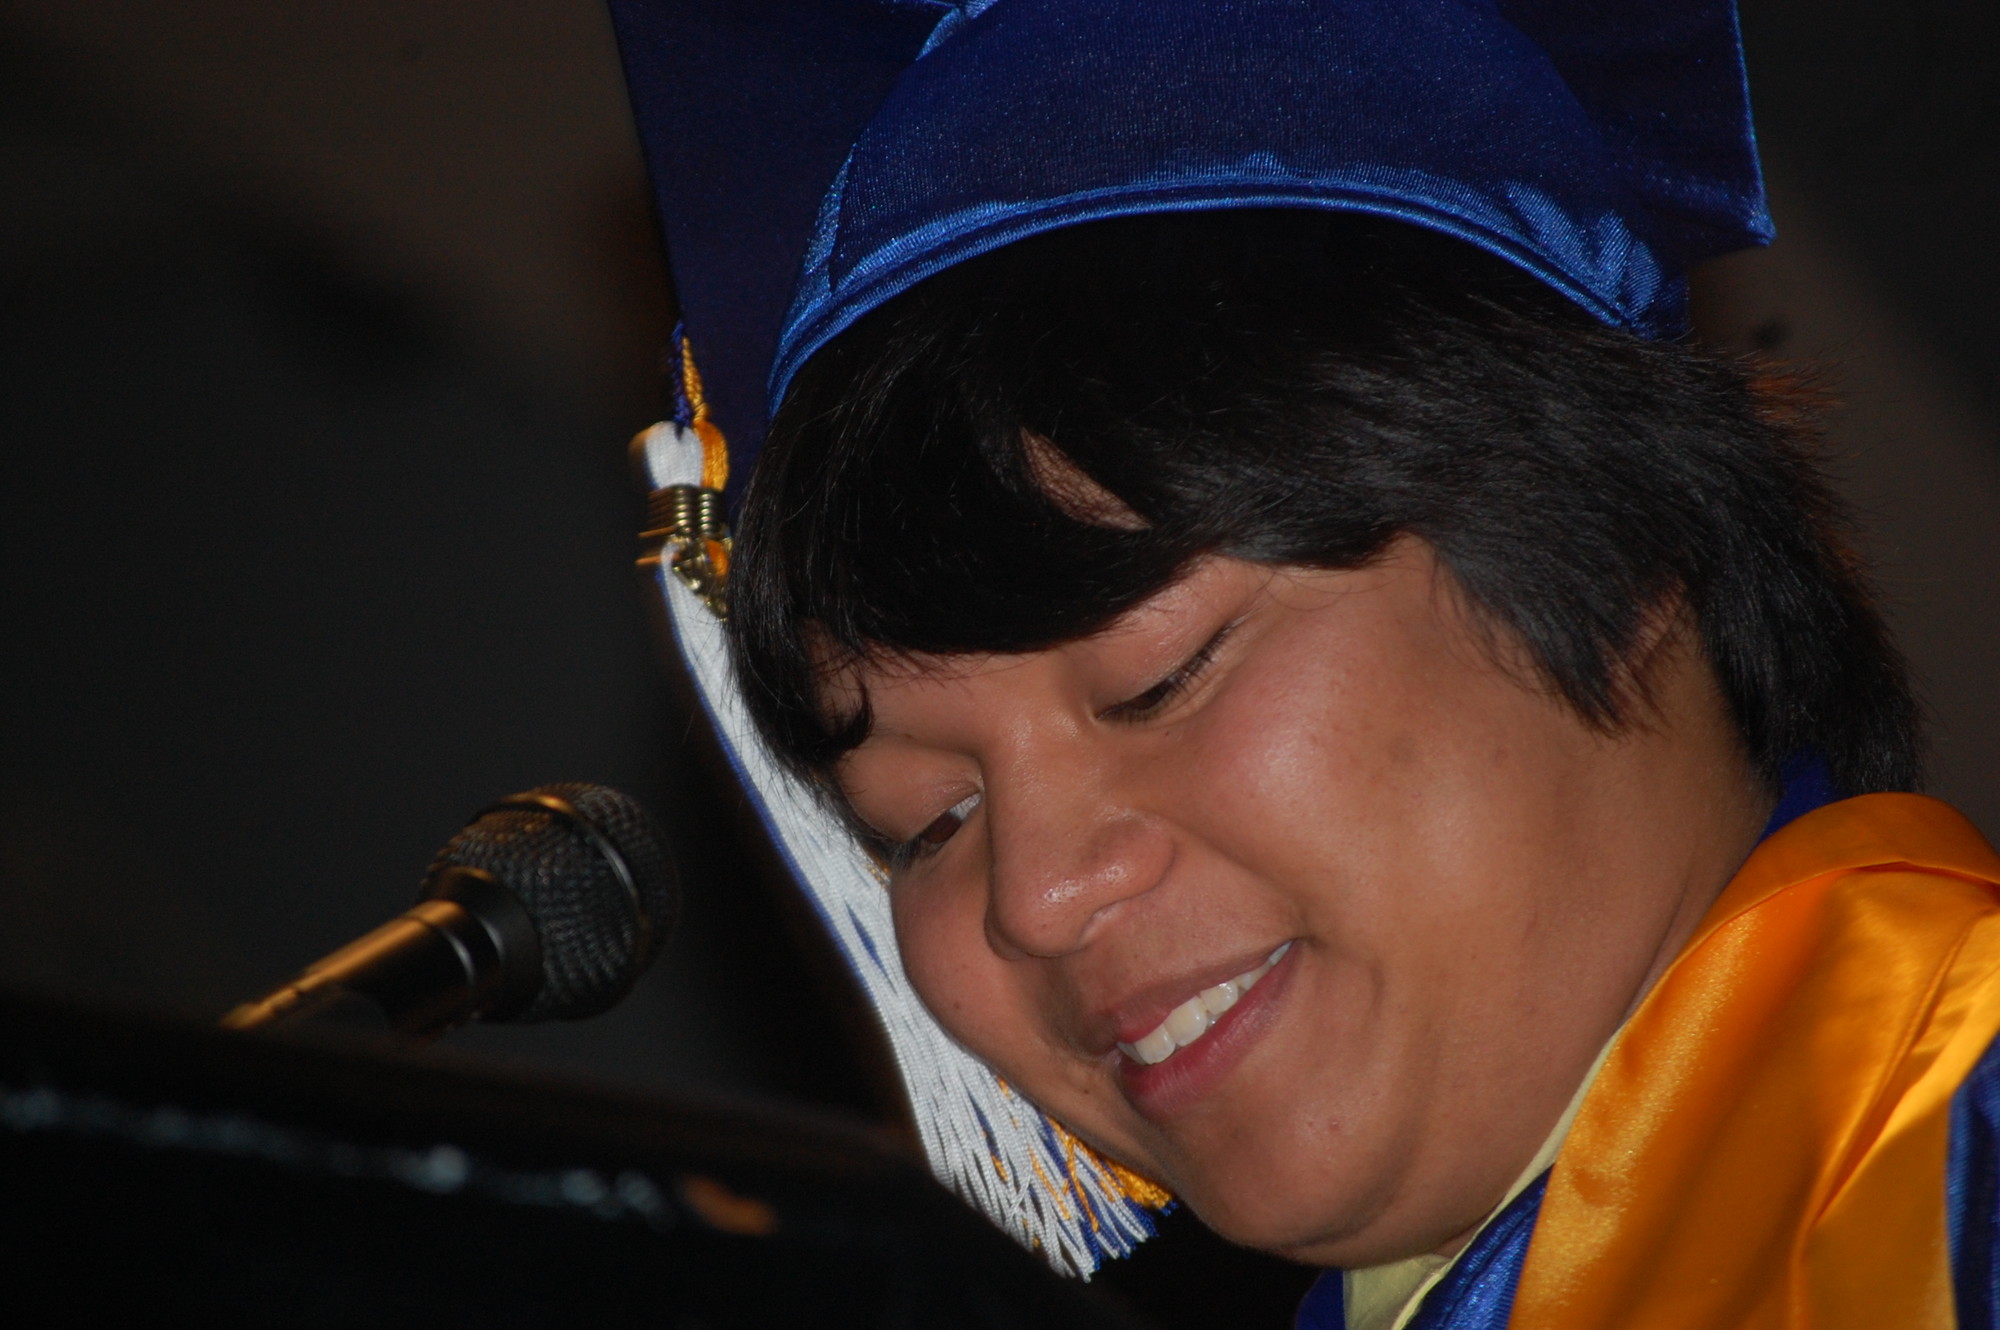 Valedictorian Christopher Chong wished his fellow graduates much success.